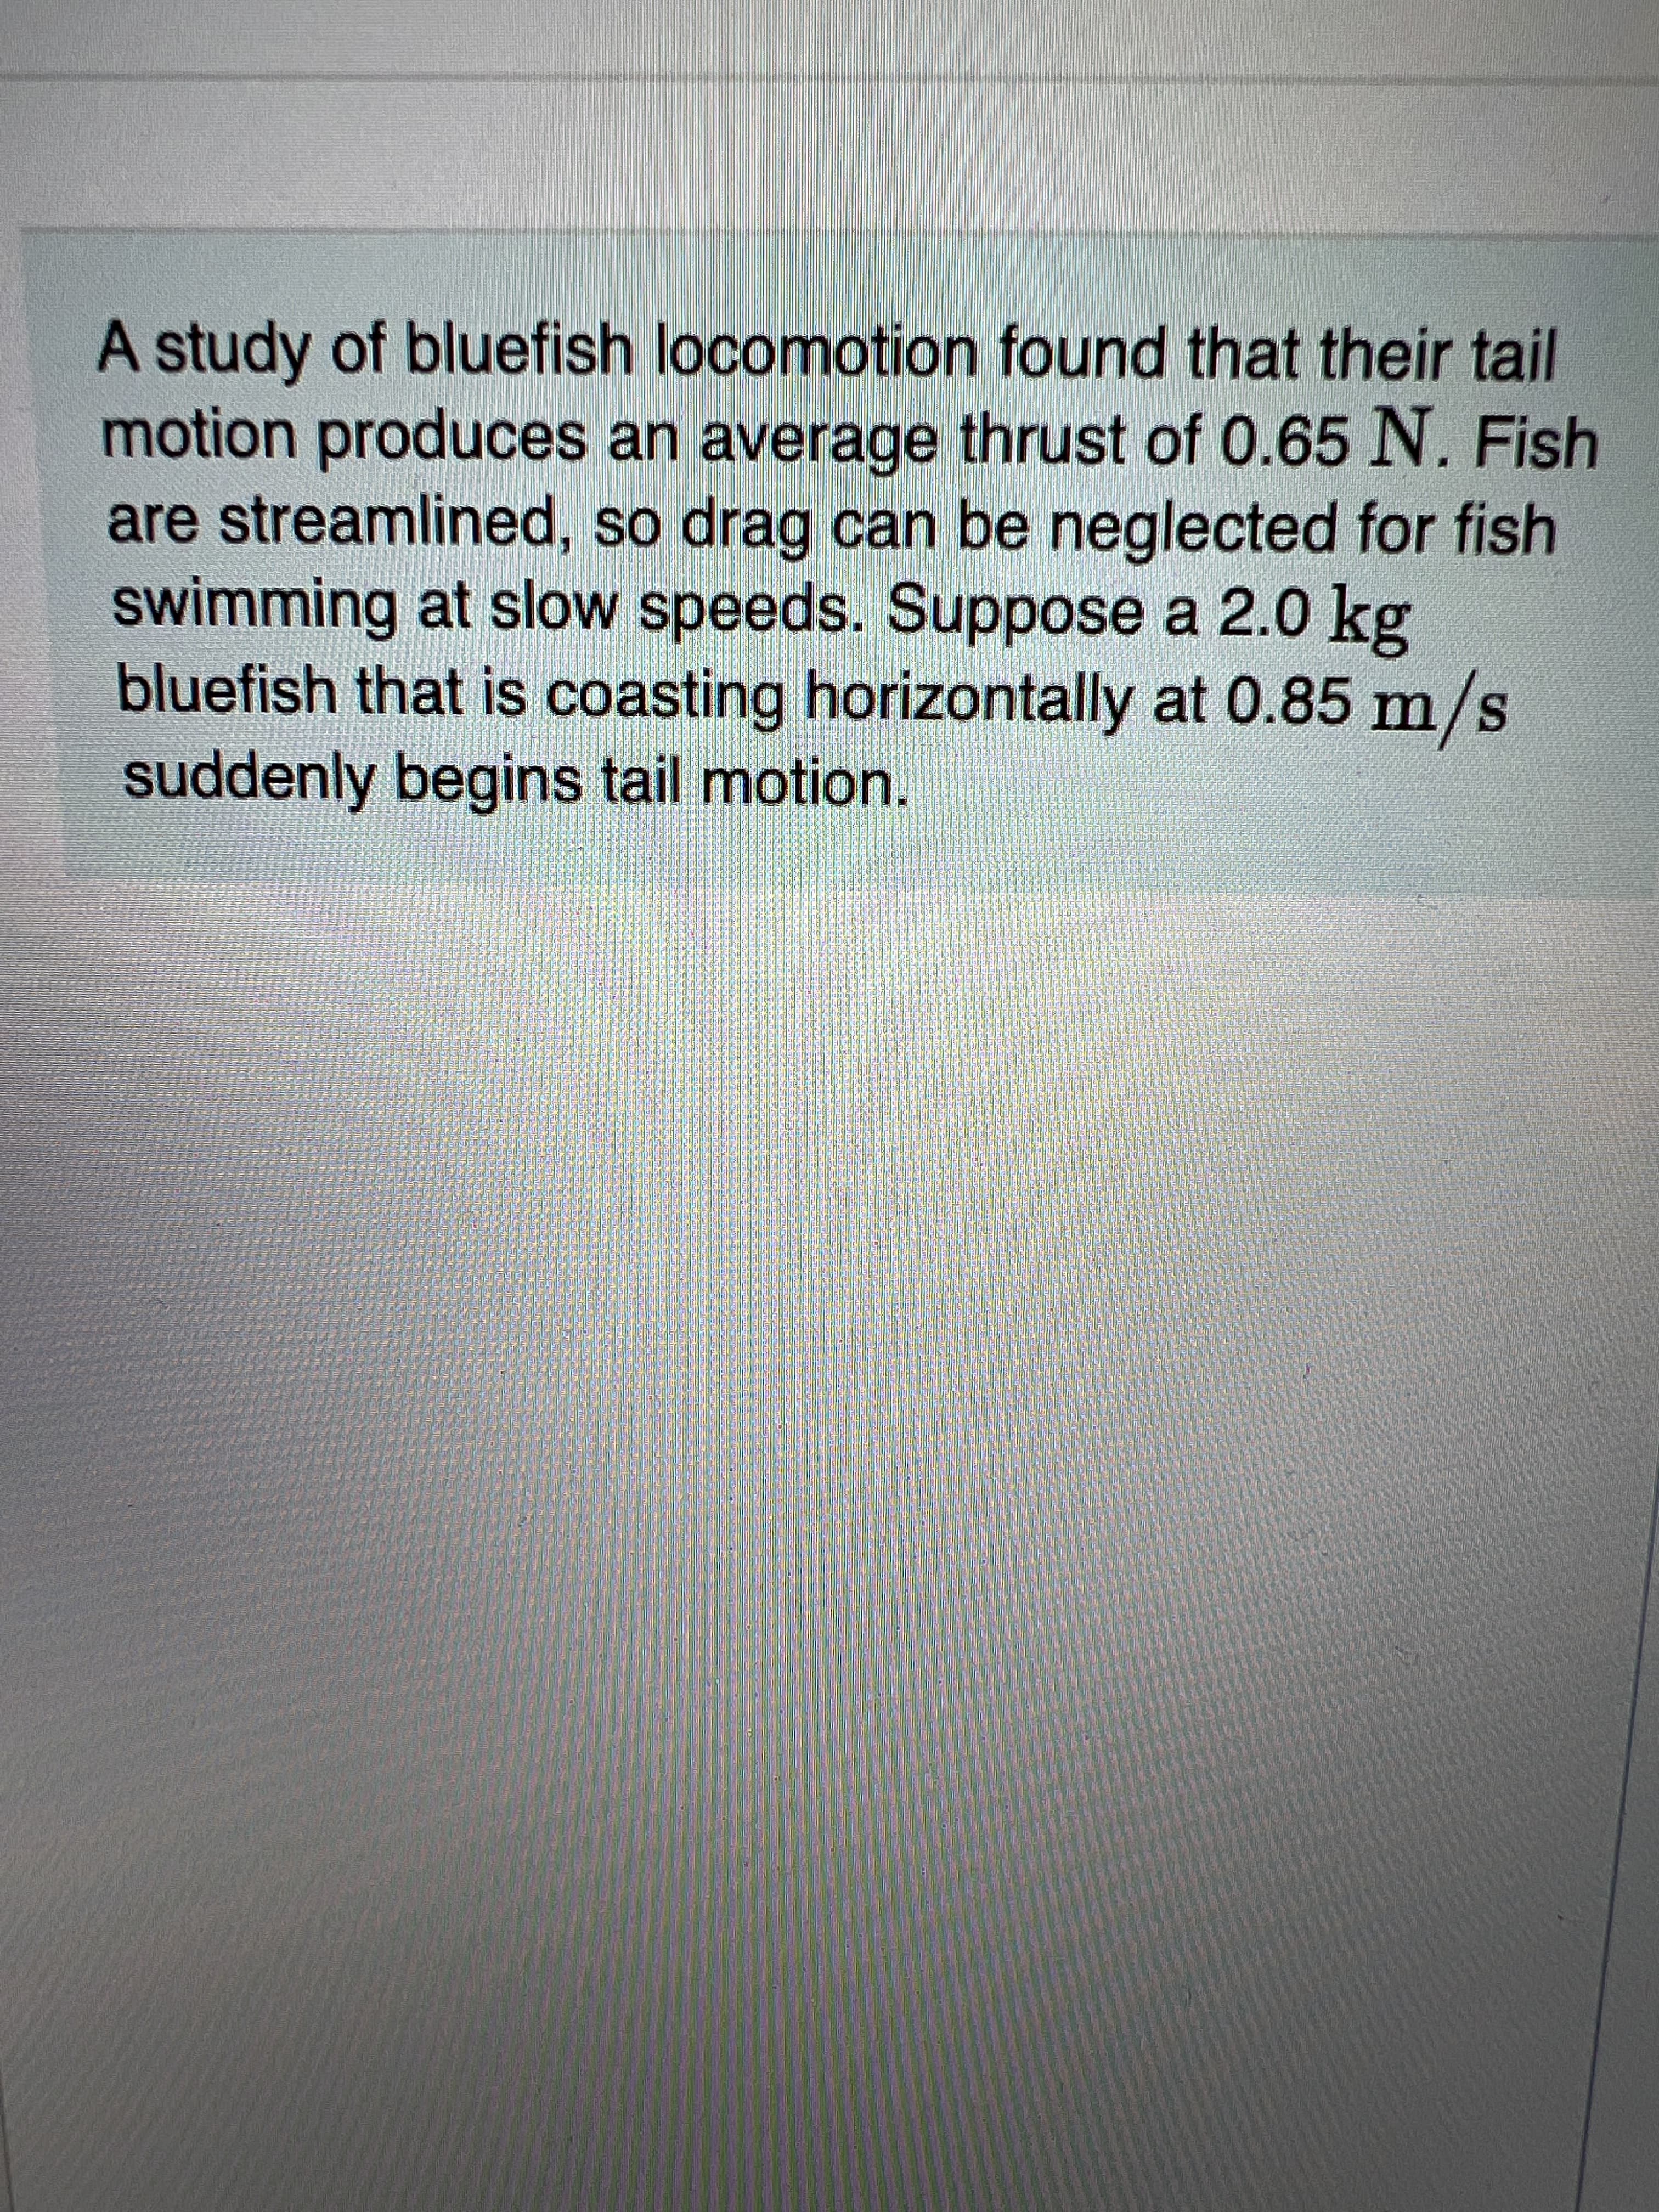 A study of bluefish locomotion found that their tail
motion produces an average thrust of 0.65 N. Fish
are streamlined, so drag can be neglected for fish
swimming at slow speeds. Suppose a 2.0 kg
bluefish that is coasting horizontally at 0.85 m/s
suddenly begins tail motion.
